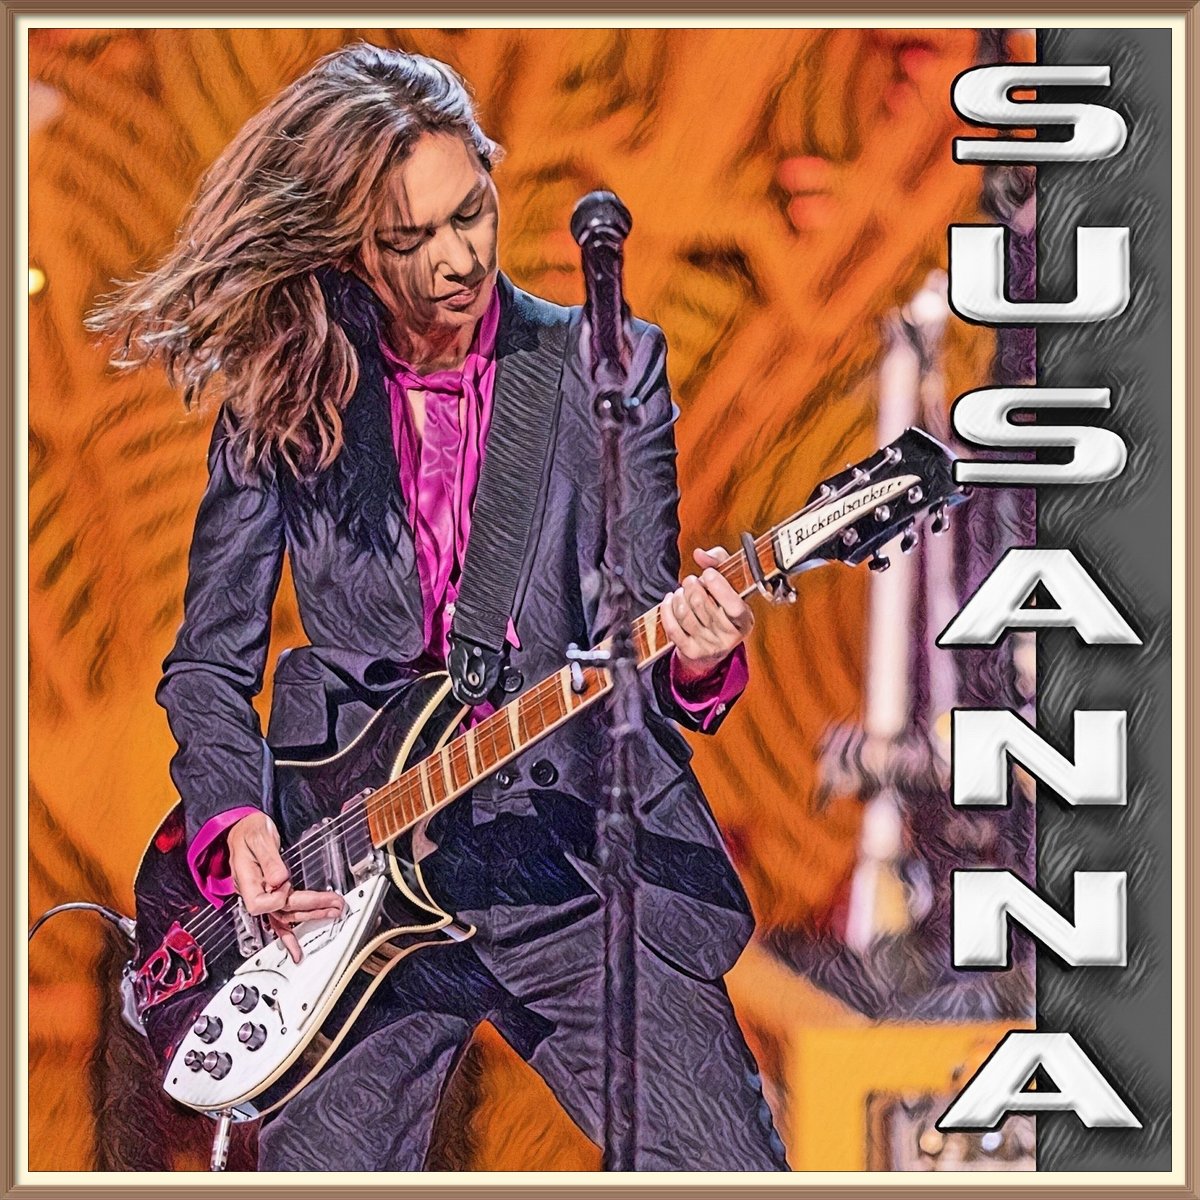 @Wildaboutmusic that first photo of @SusannaHoffs from the Paul Simon Special you displayed here, well I did a little graphics editing with it (It's a hobby of mine) so here's a couple I finished. I hope Susanna enjoys them @EthanSVG @OfficialBangles @friendlysmilepi @TamarHoffs